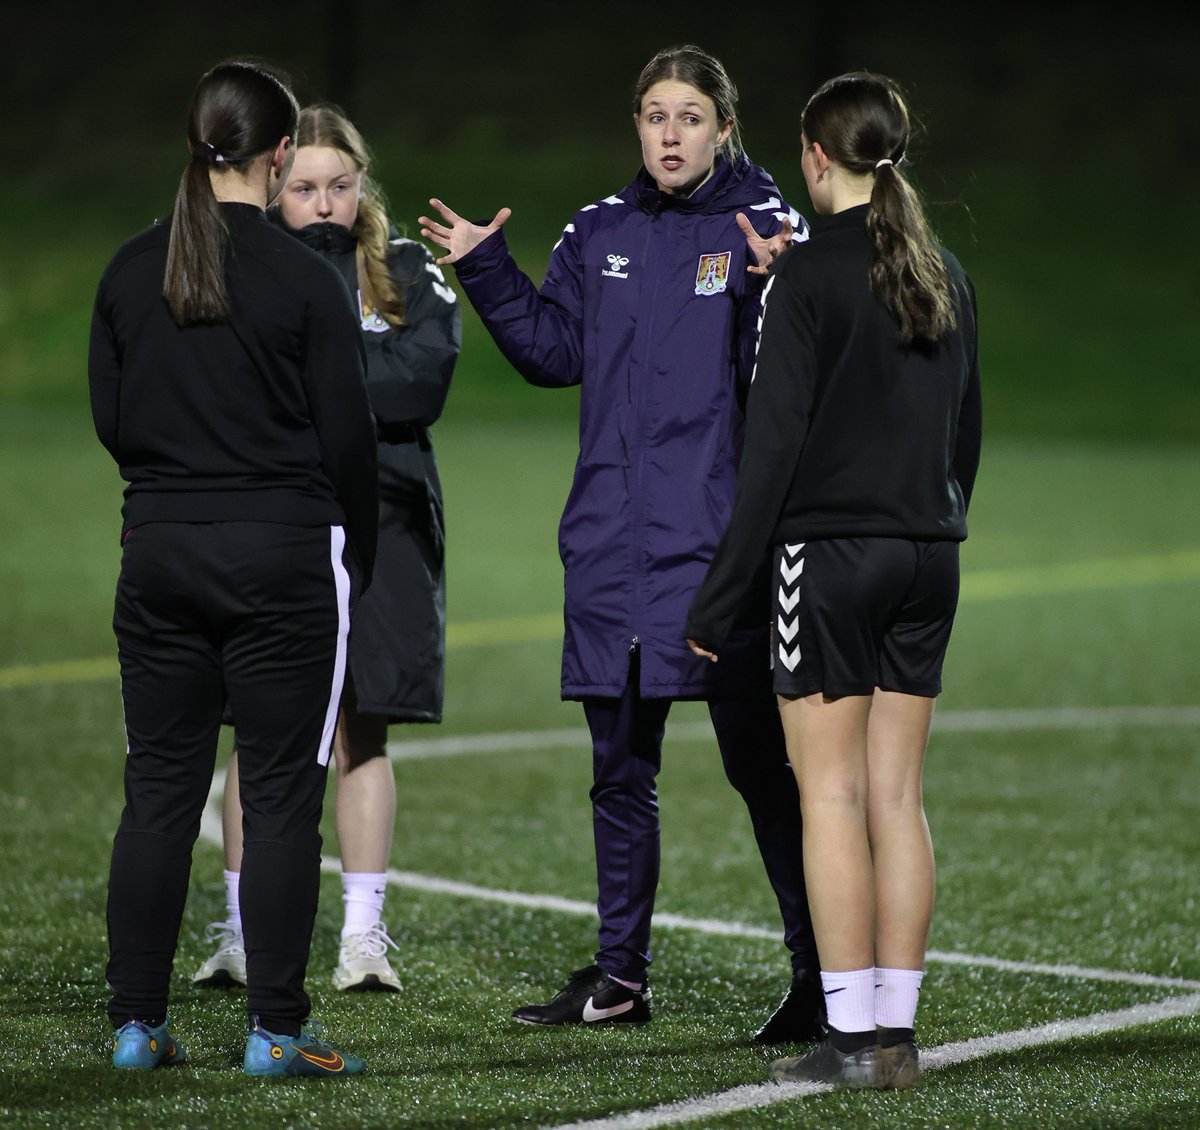 Do you want to make a difference & join our female pathway? This winter we are looking for new Emerging Talent Centre Coaches & staff to run our Grassroot Teams! Please contact Scott.Loughran@ntfc.co.uk for more information Apply for the ETC Role now👇 ntfccommunity.livevacancies.co.uk/#/job/details/…